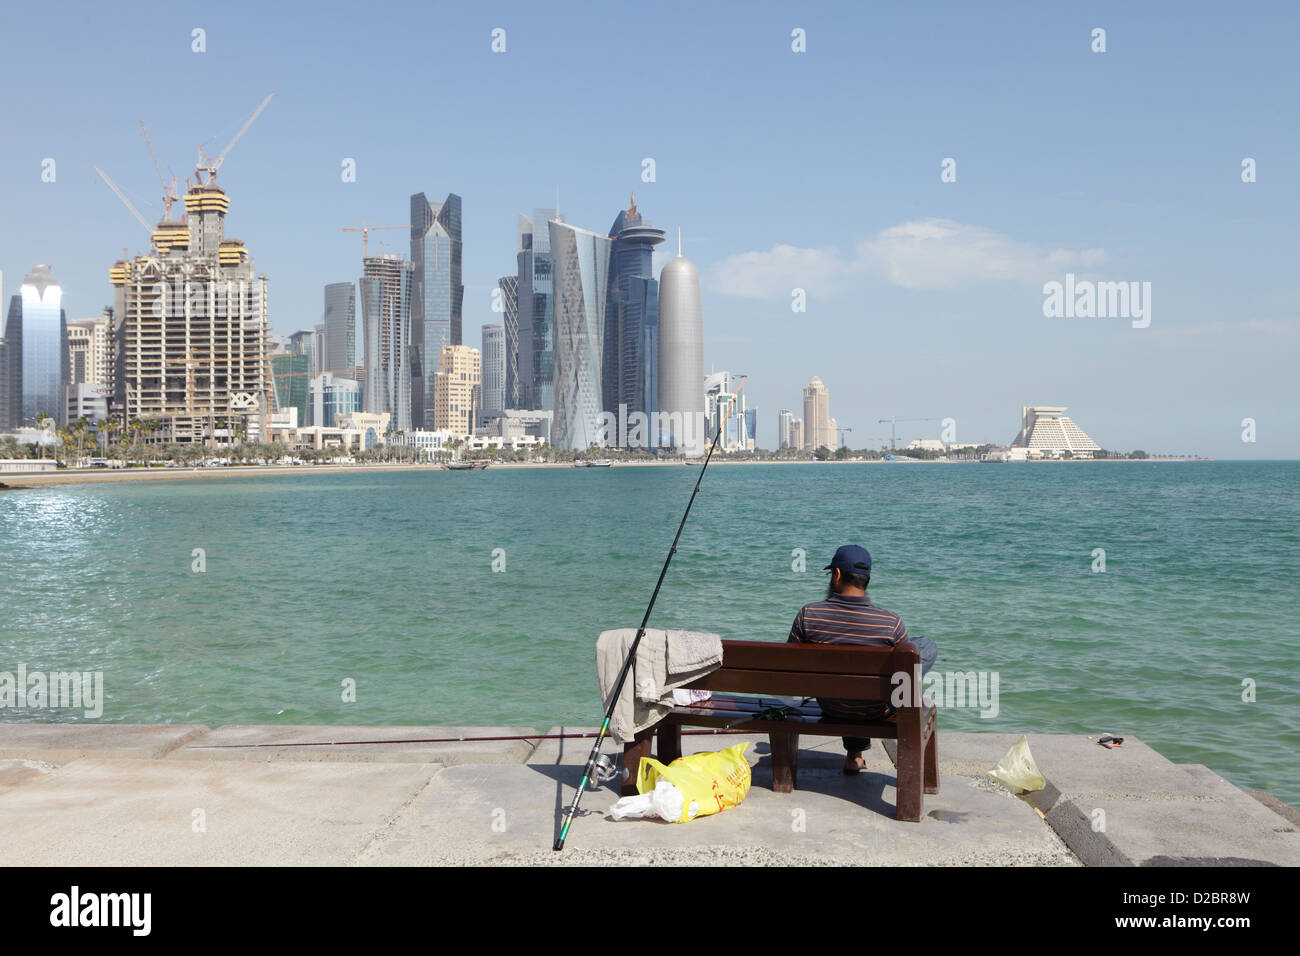 An Asian expat in Doha, Qatar, enjoys his Saturday fishing from the Corniche in Doha Bay Stock Photo